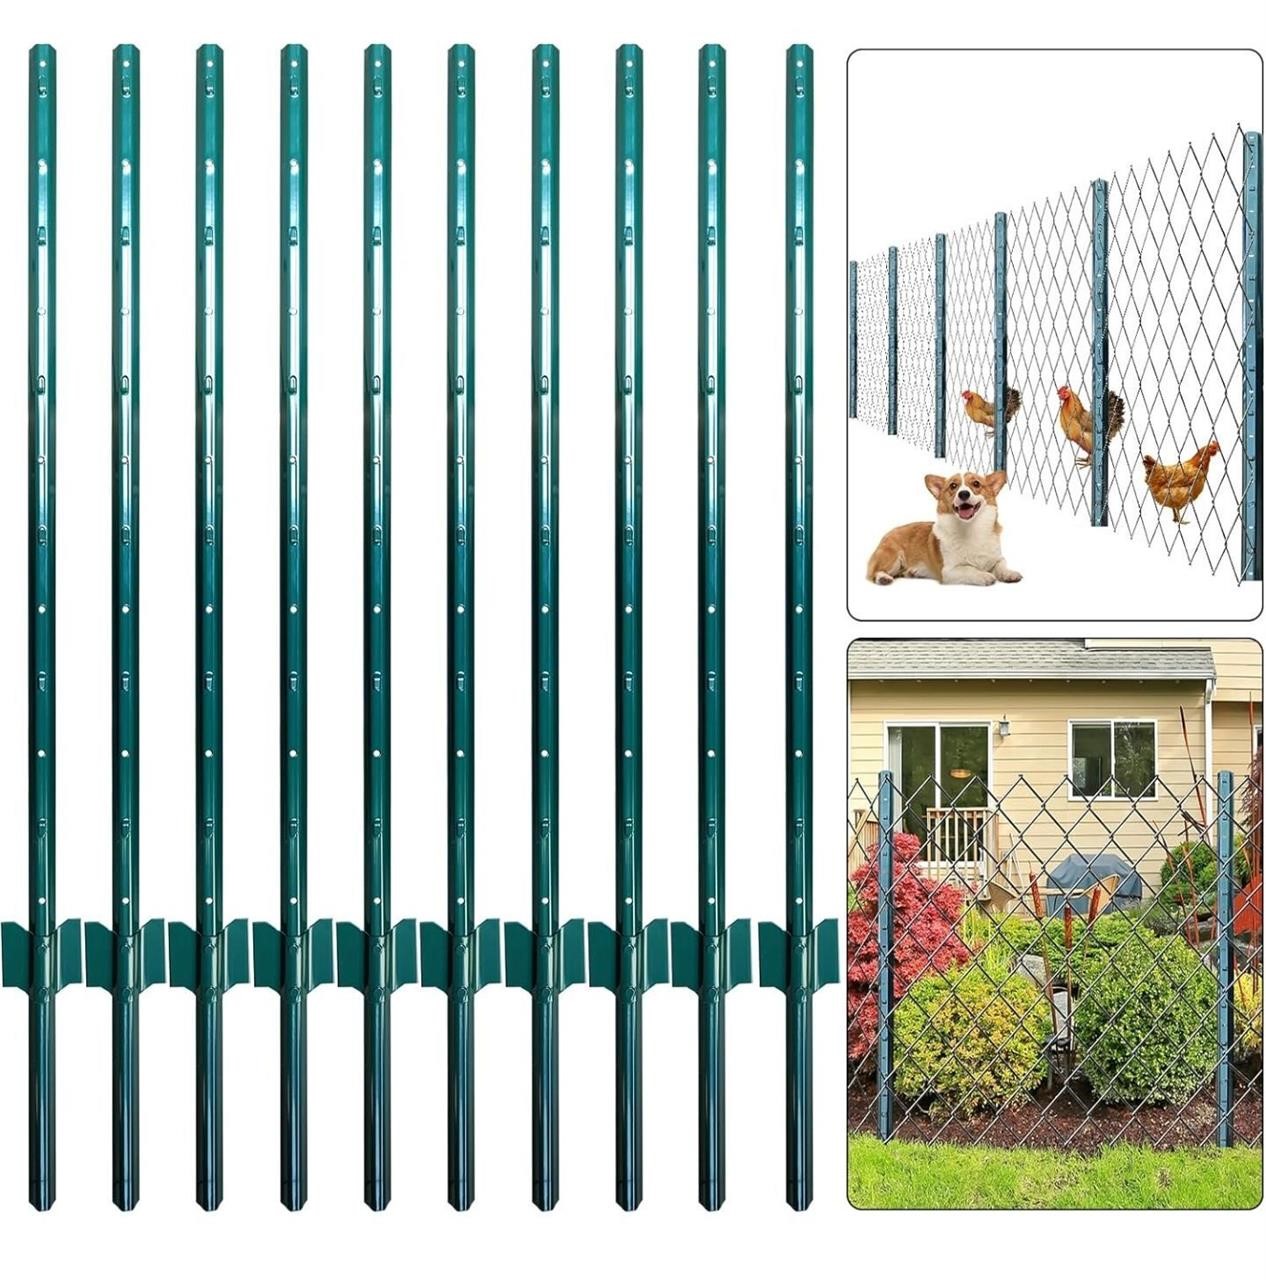 ($70) Thealyn Fence Posts 4 Feet,Pack of 10,M